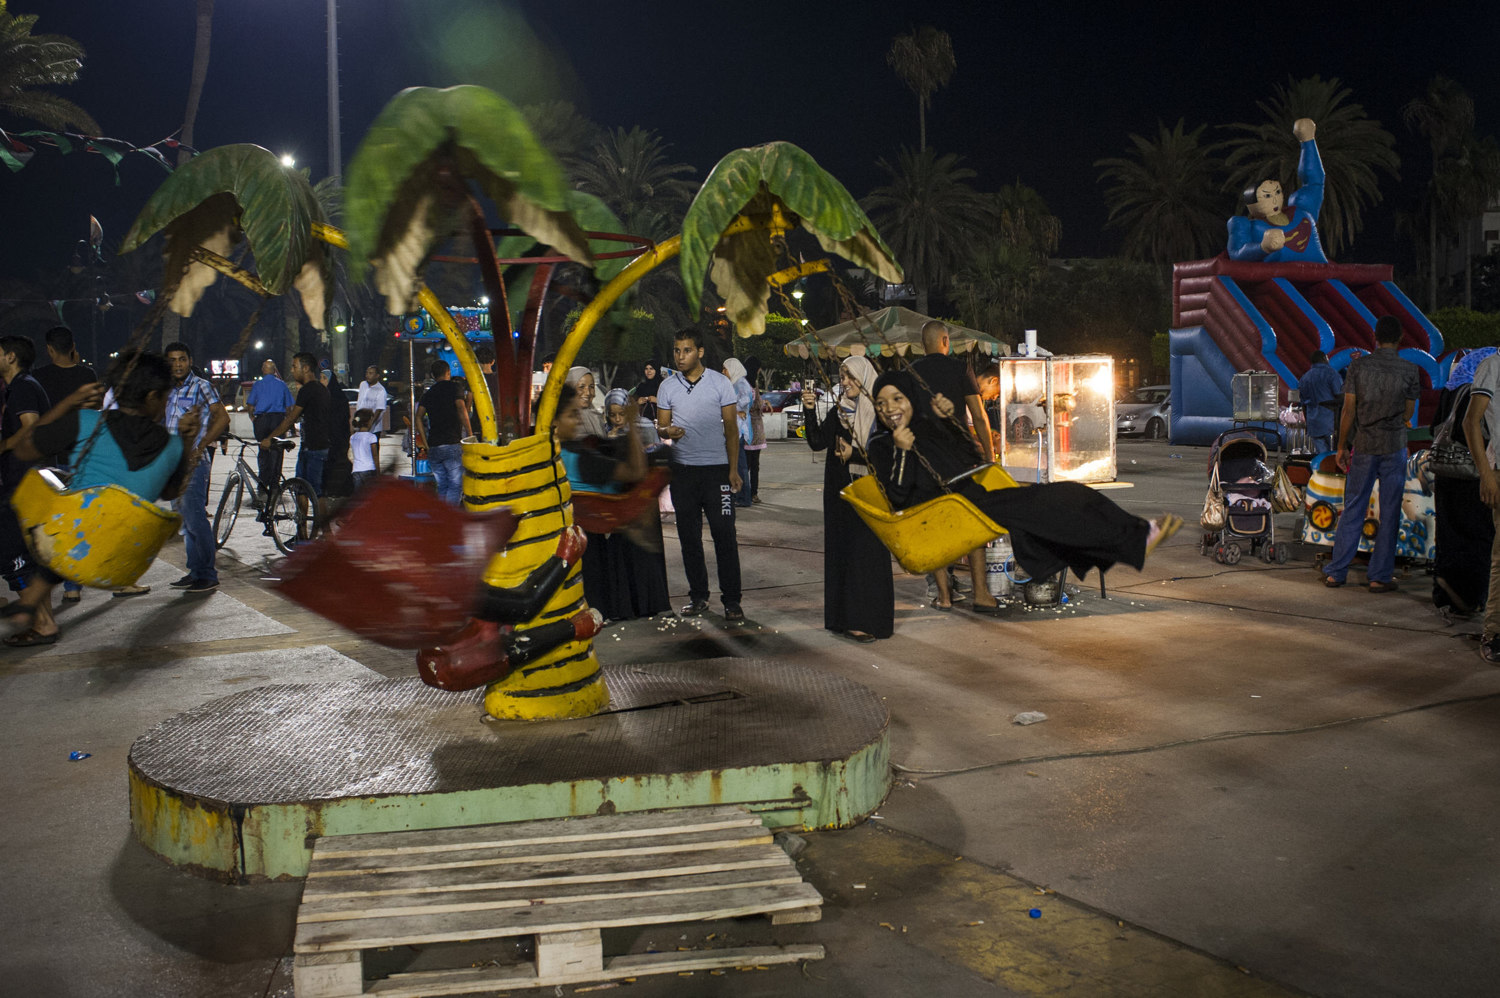  Children enjoy themselves on a ride in Martyr's Square in Tripoli, Libya. Public spaces morph into amusement parks during the summer months in Libya as the heat keeps many indoors all day. 

 